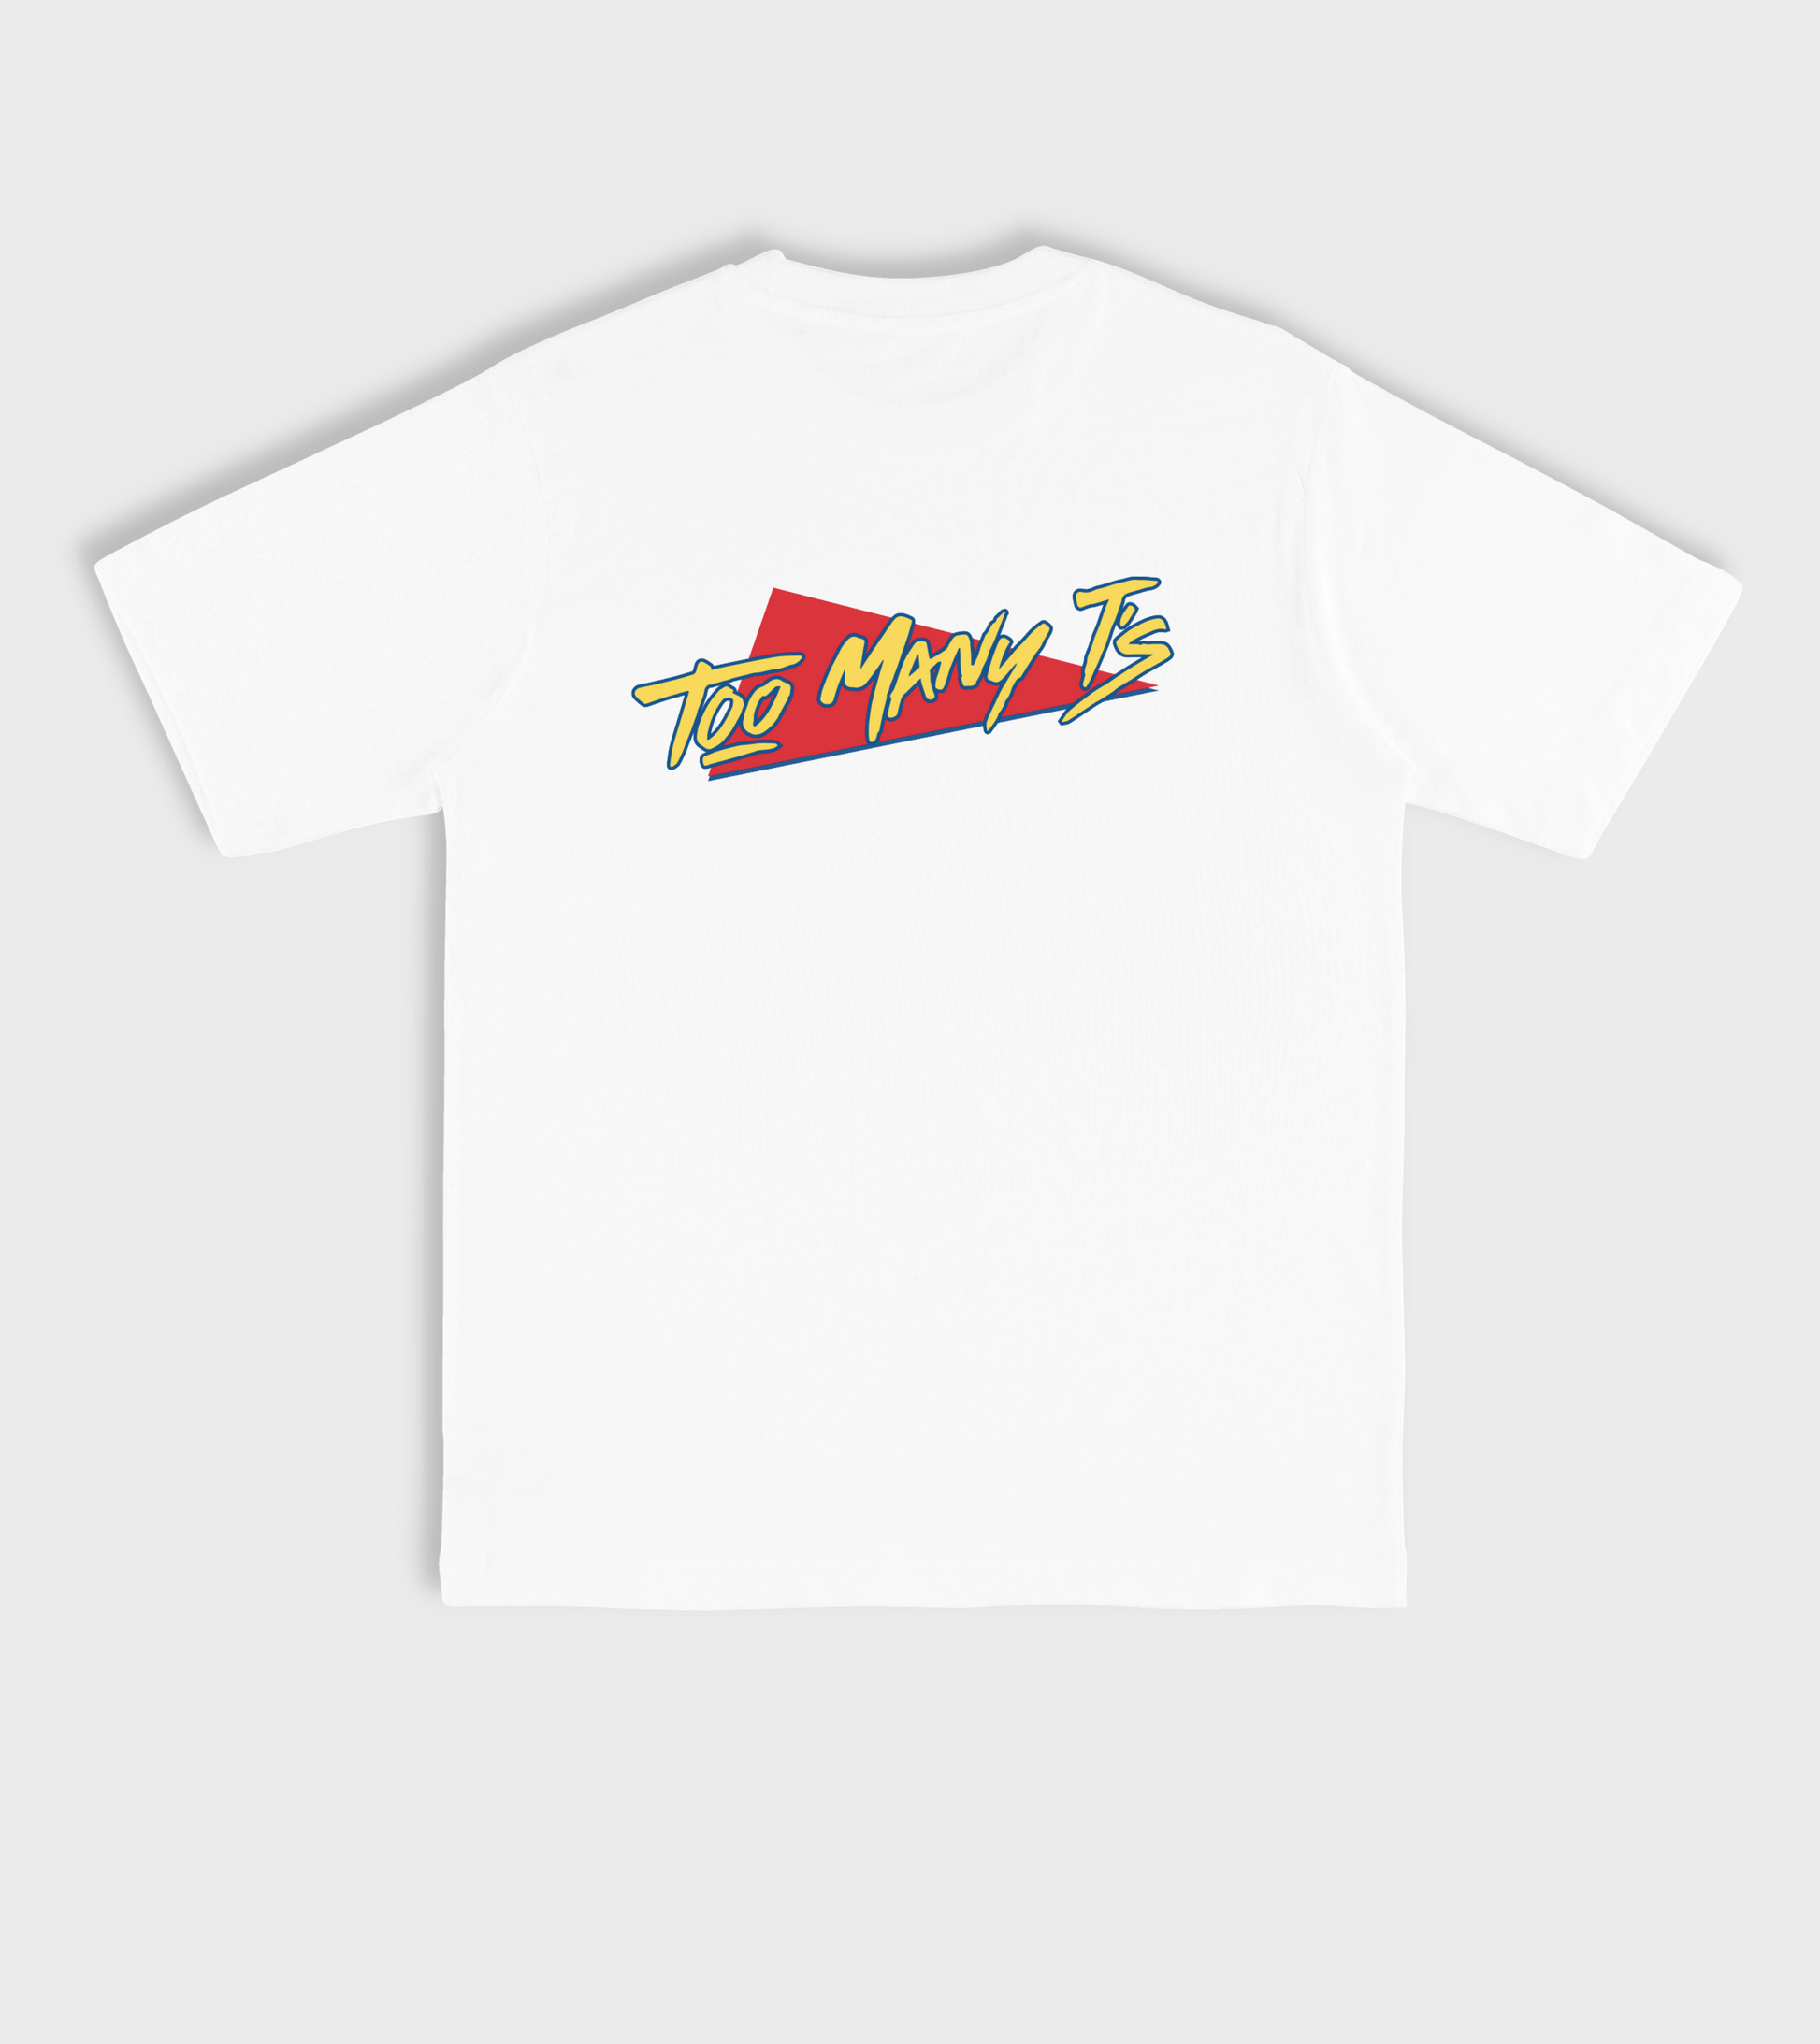 White oversized t-shirt with red and yellow classic TOO MANY T'S designs.